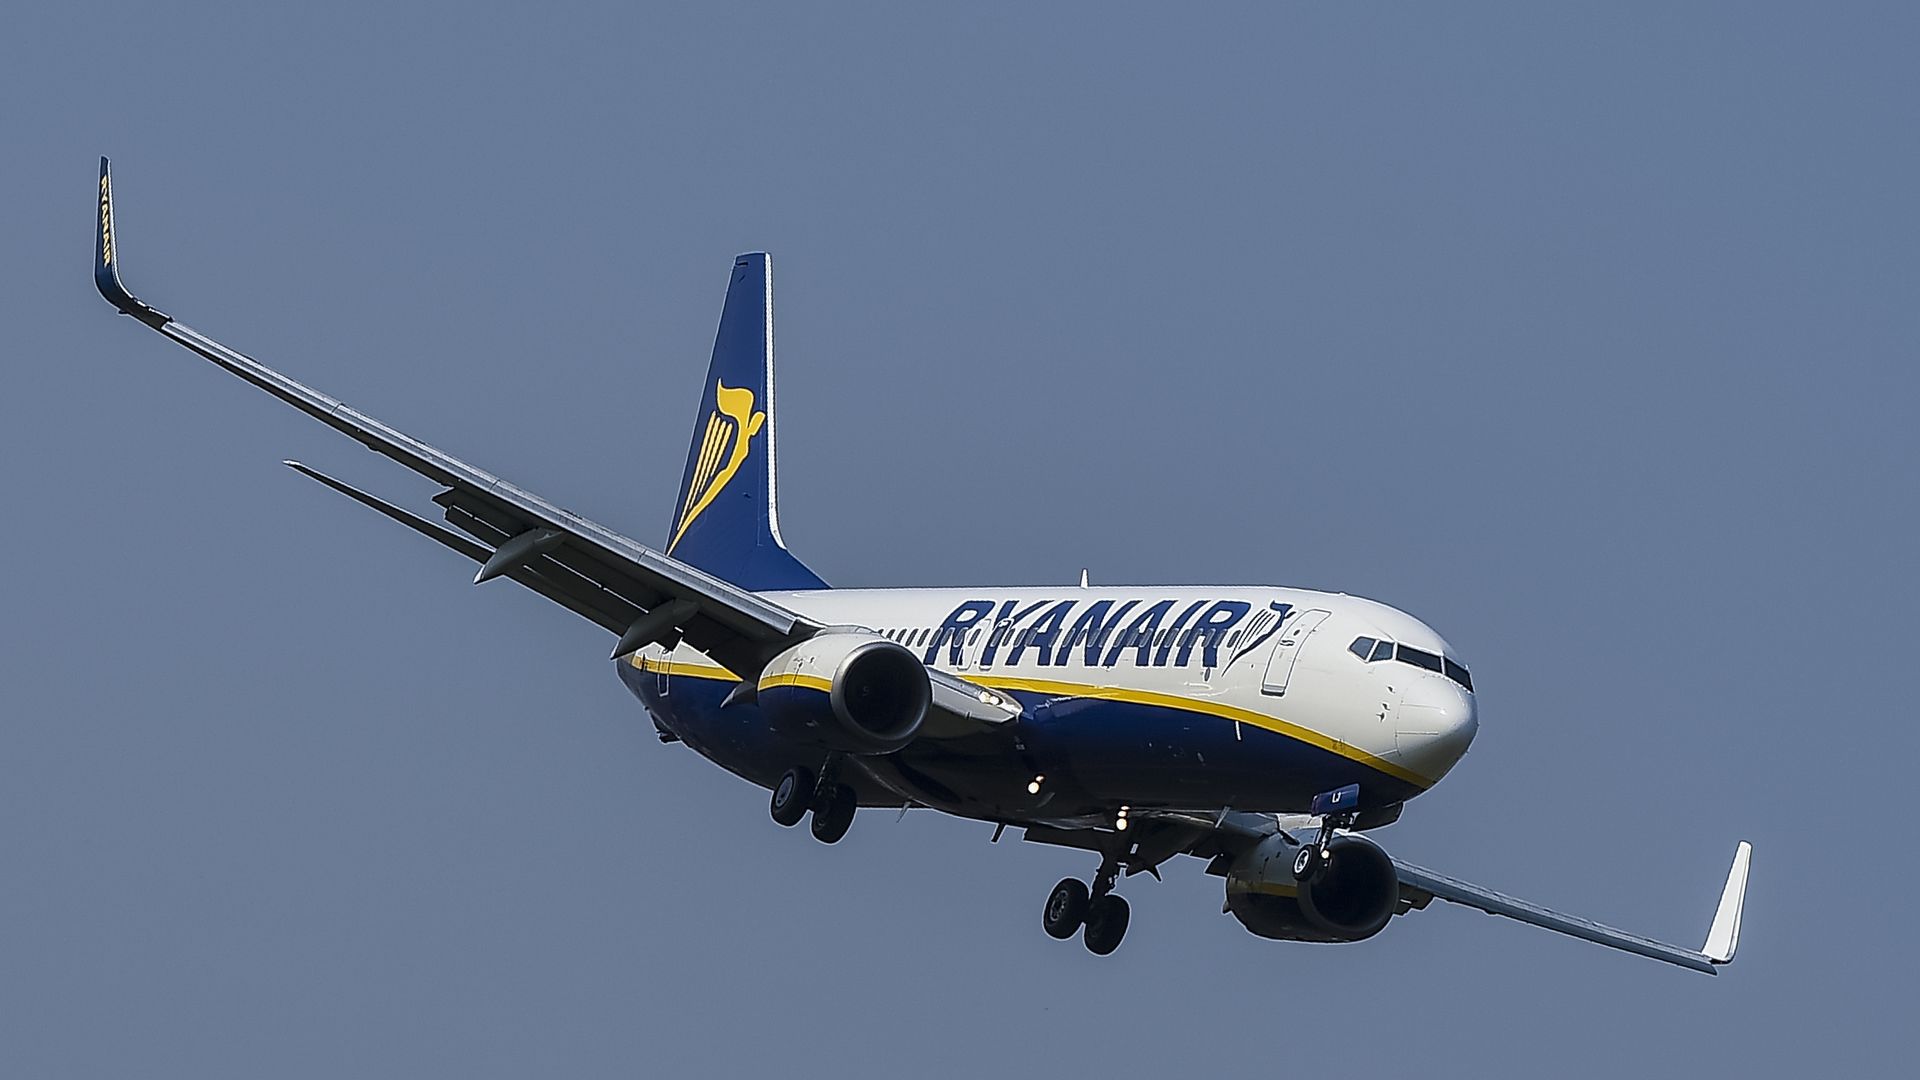 A Ryanair Boeing 737-800 aircraft approches